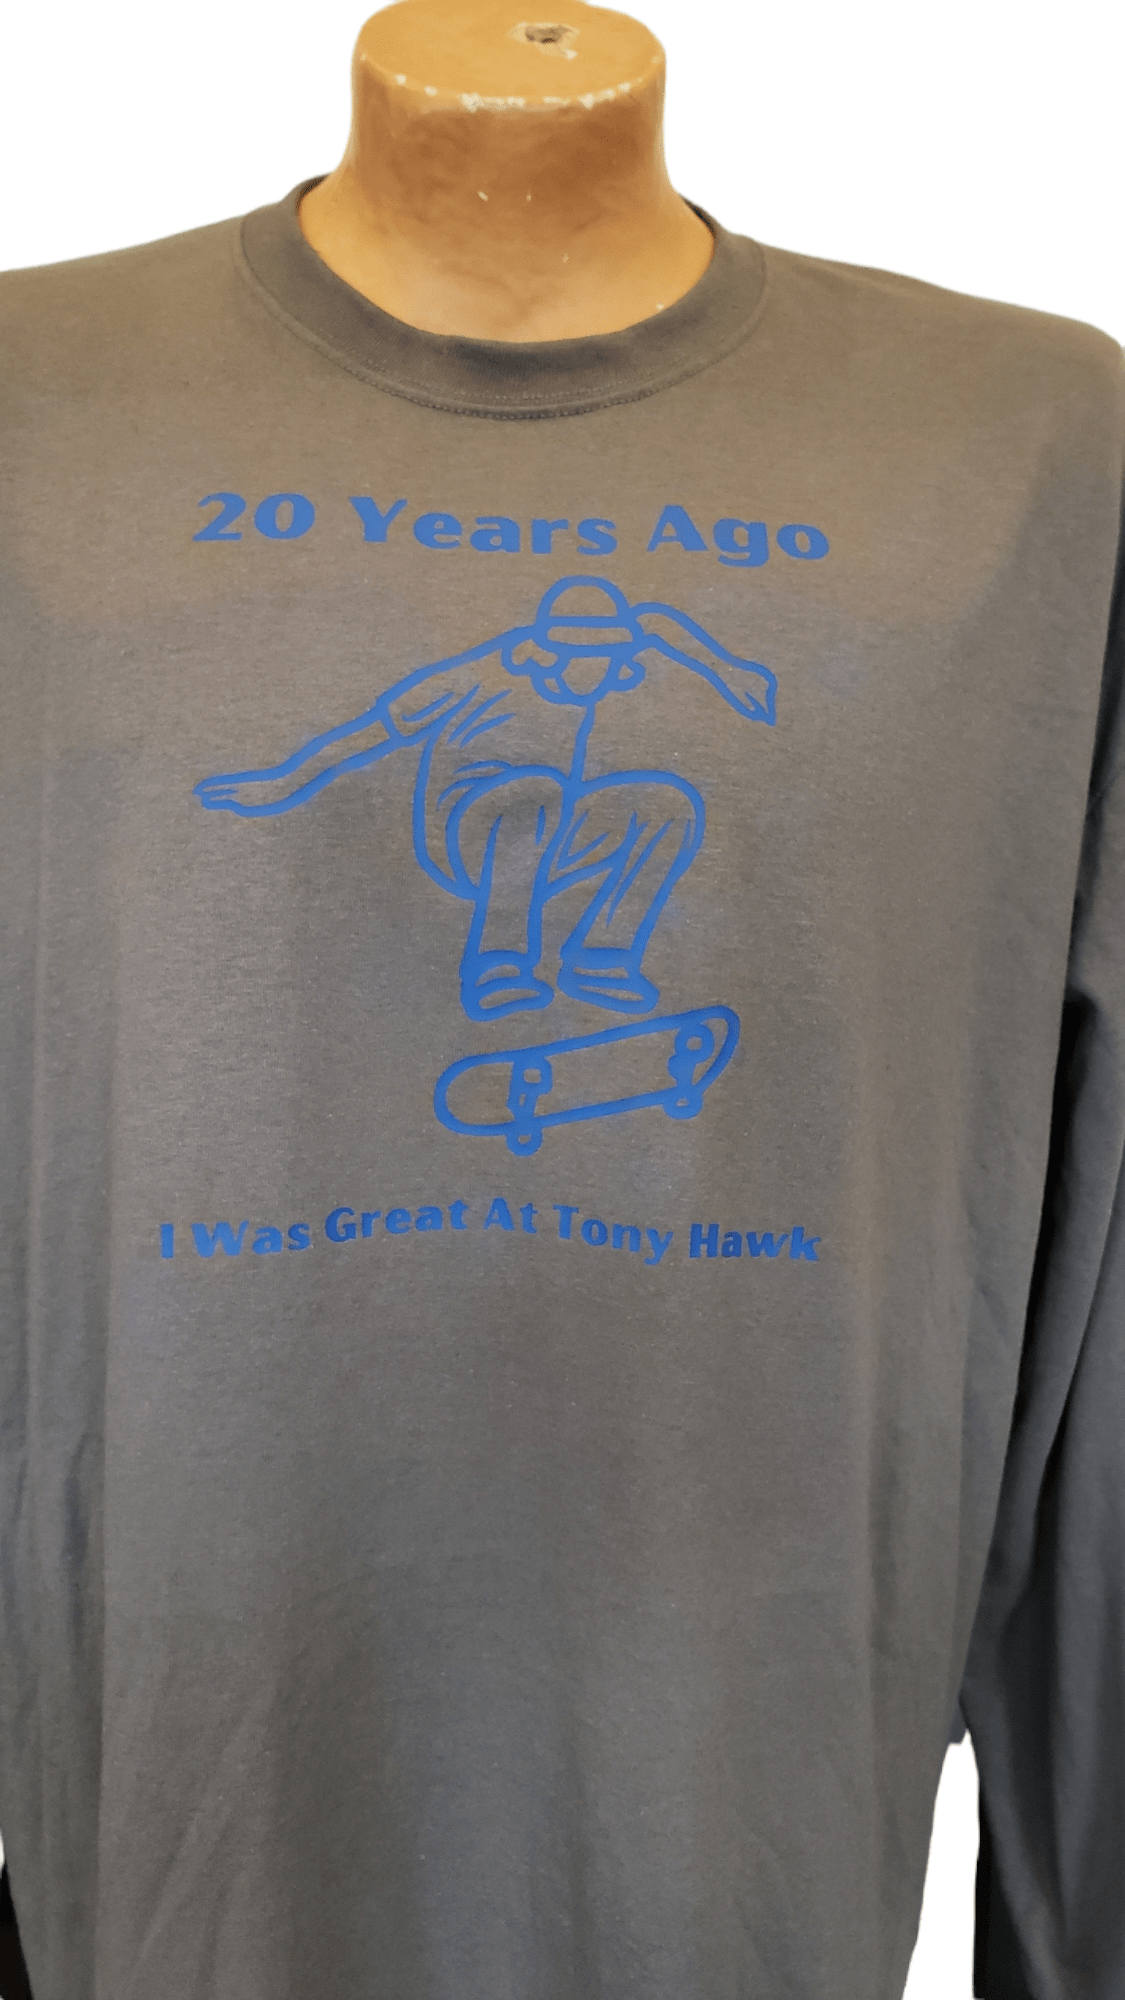 Carrot Stick Sports Clothing 3X-Large I Was Great at Tony Hawk T-Shirt